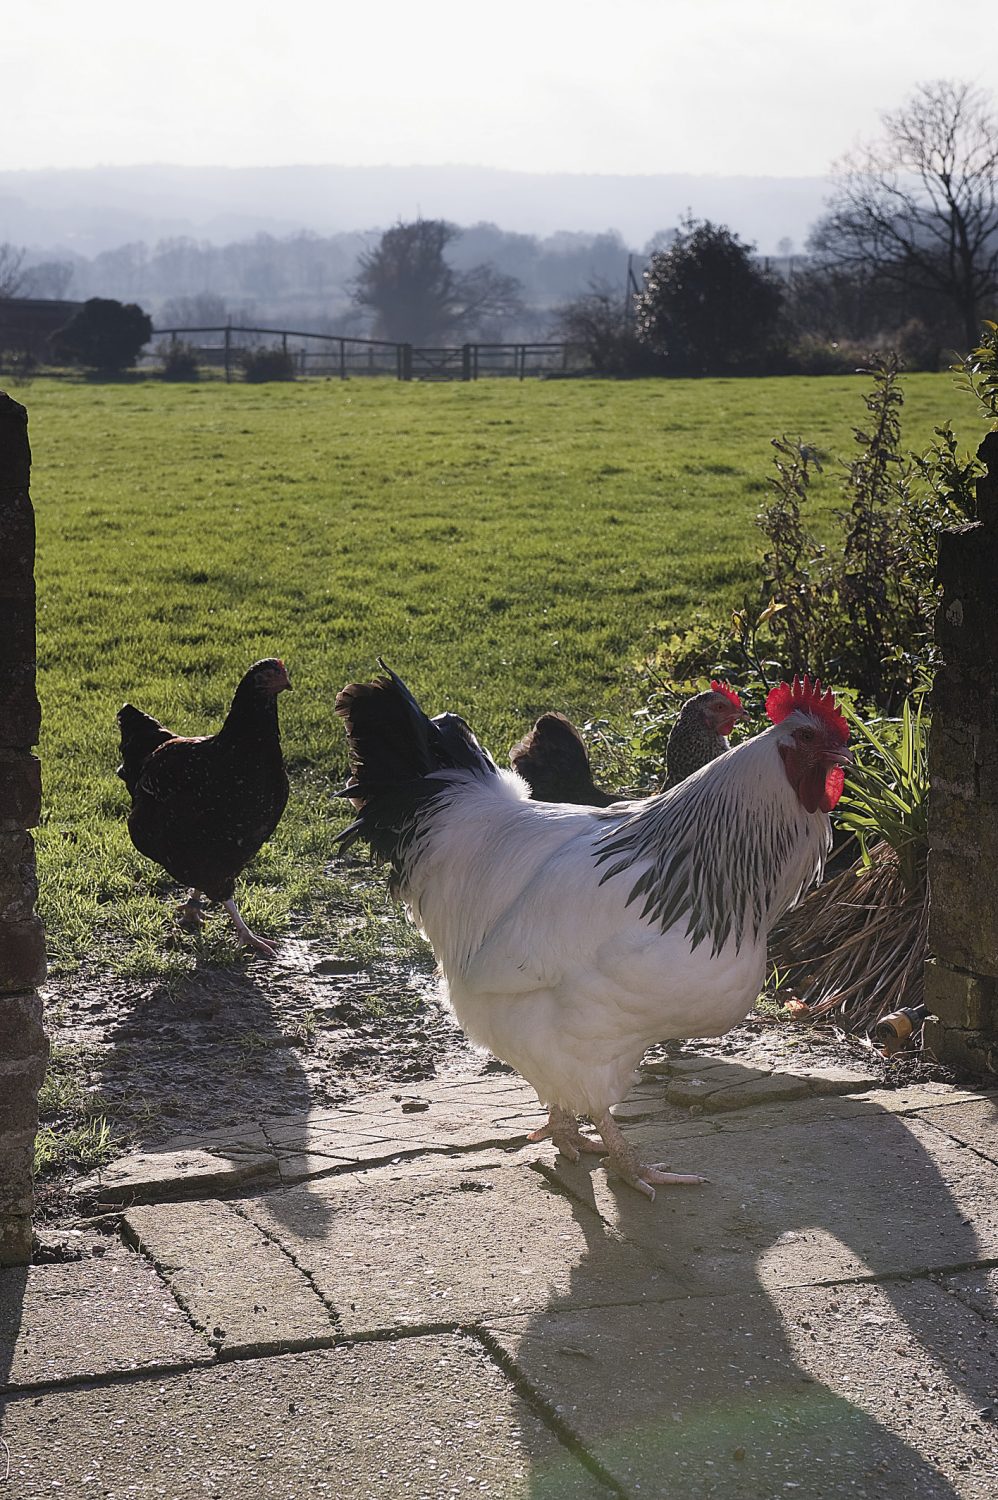 the chickens enjoy the afternoon sunshine